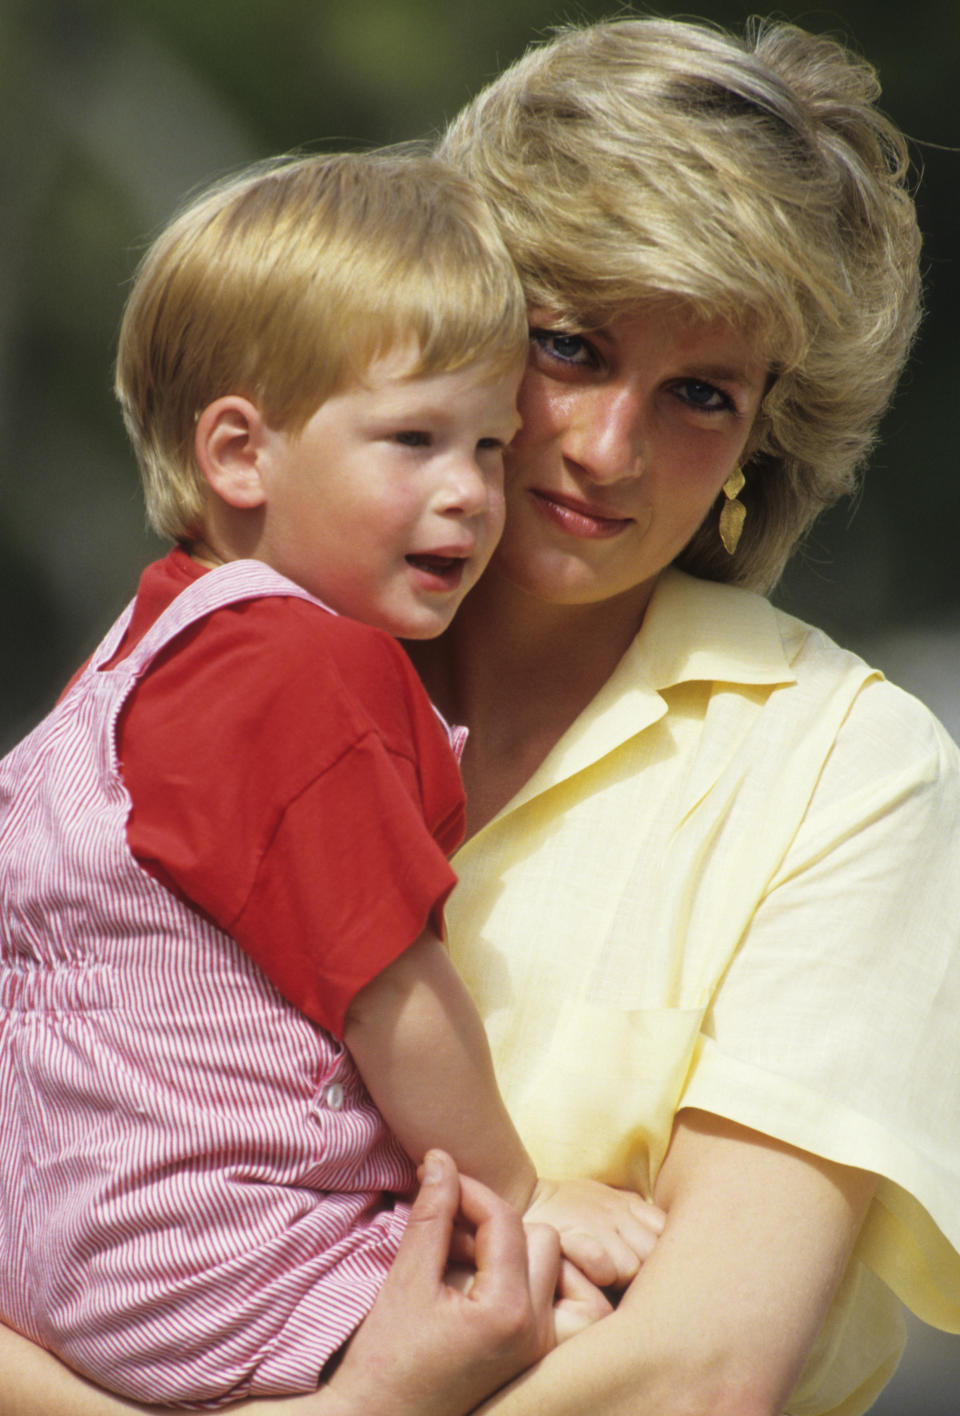 Diana, Princess of Wales with Prince Harry on holiday in Majorca, Spain on August 10, 1987